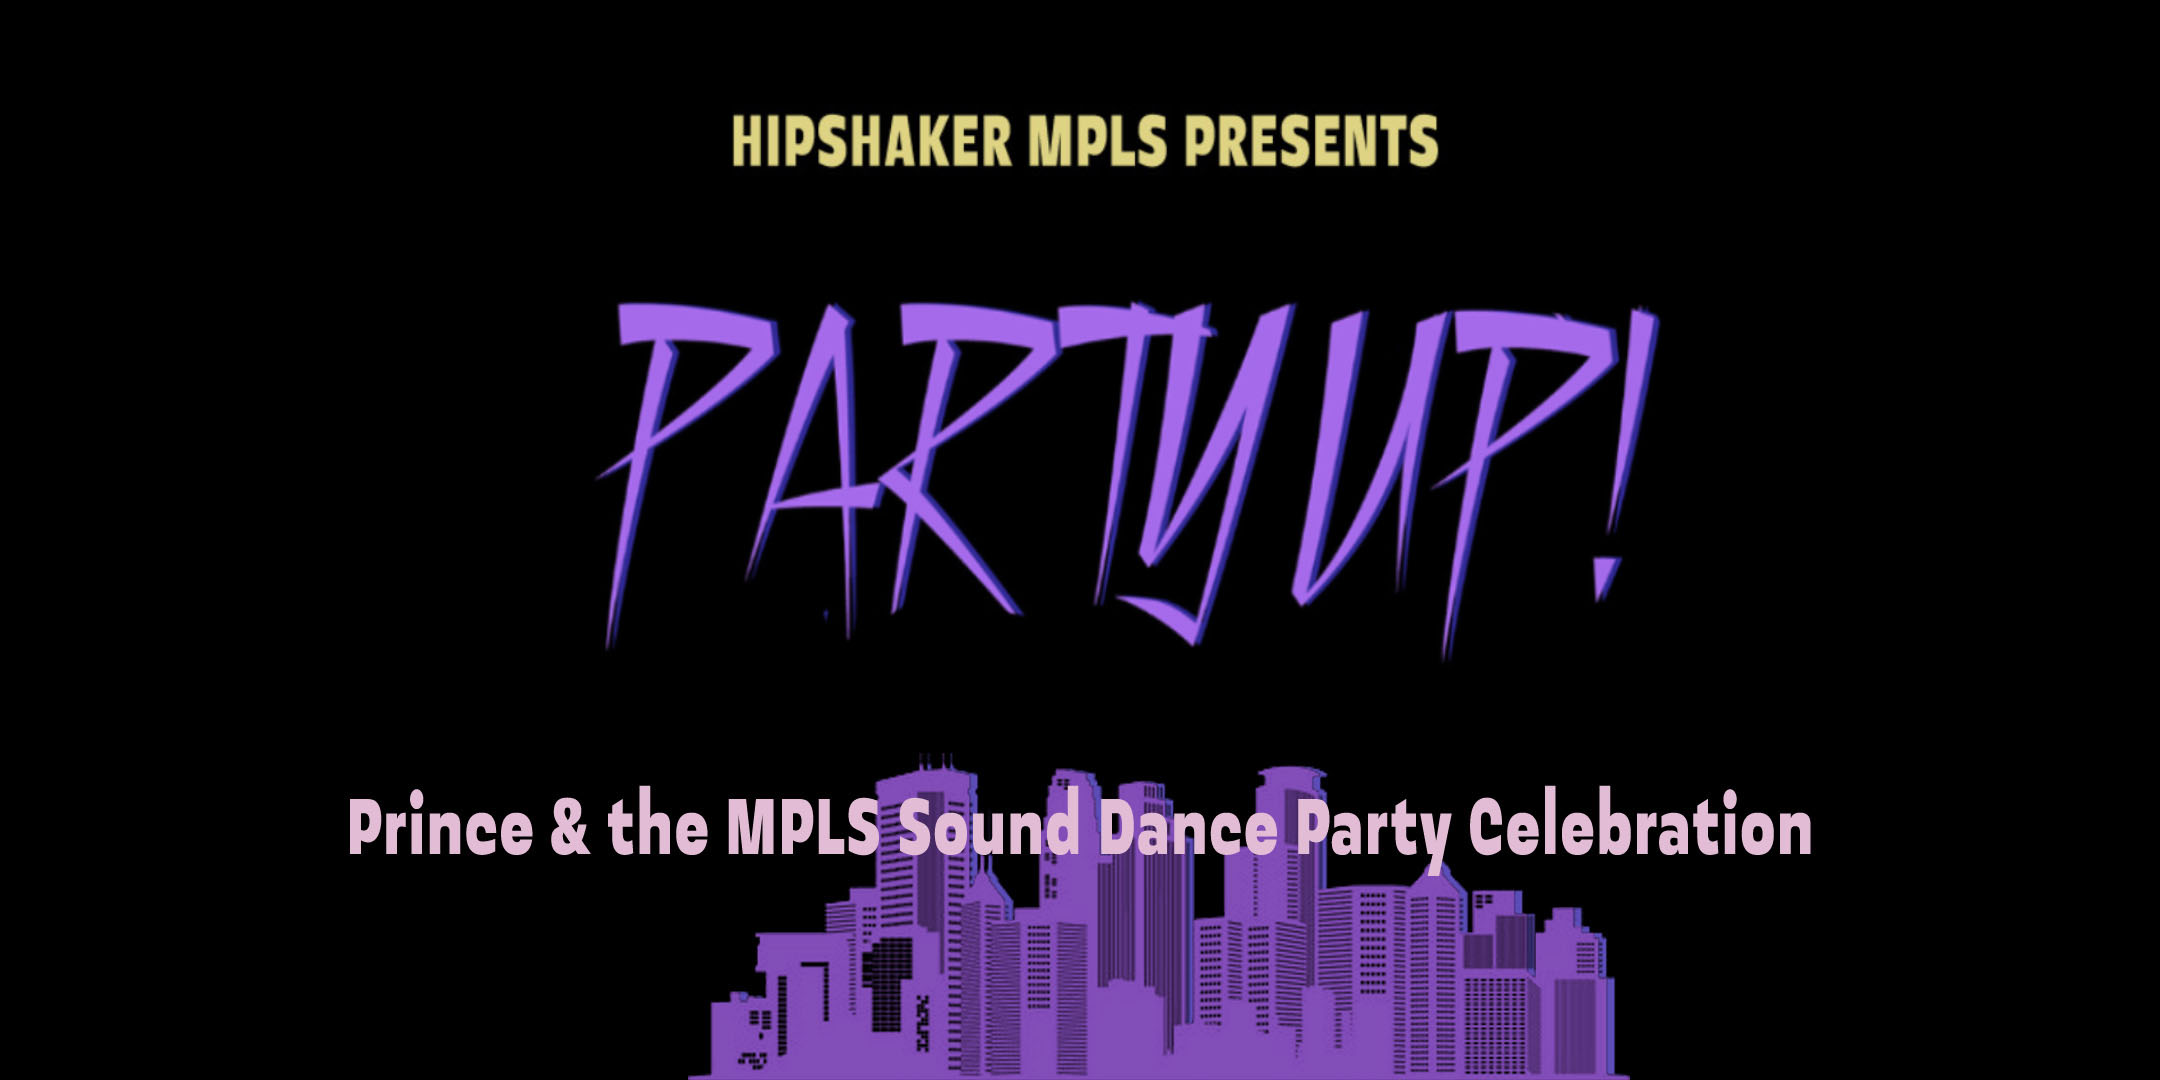 Hipshaker MPLS Presents: Partyup! Prince and the MPLS Sound Dance Party DJs Brian Engel, Noah Kurth Saturday, February 3 James Ballentine "Uptown" VFW Post 246 Doors 10:00pm :: Music 10:00pm :: 21+ GA $10 ADV / $15 DOS NO REFUNDS :::Tickets on Sale Now:::